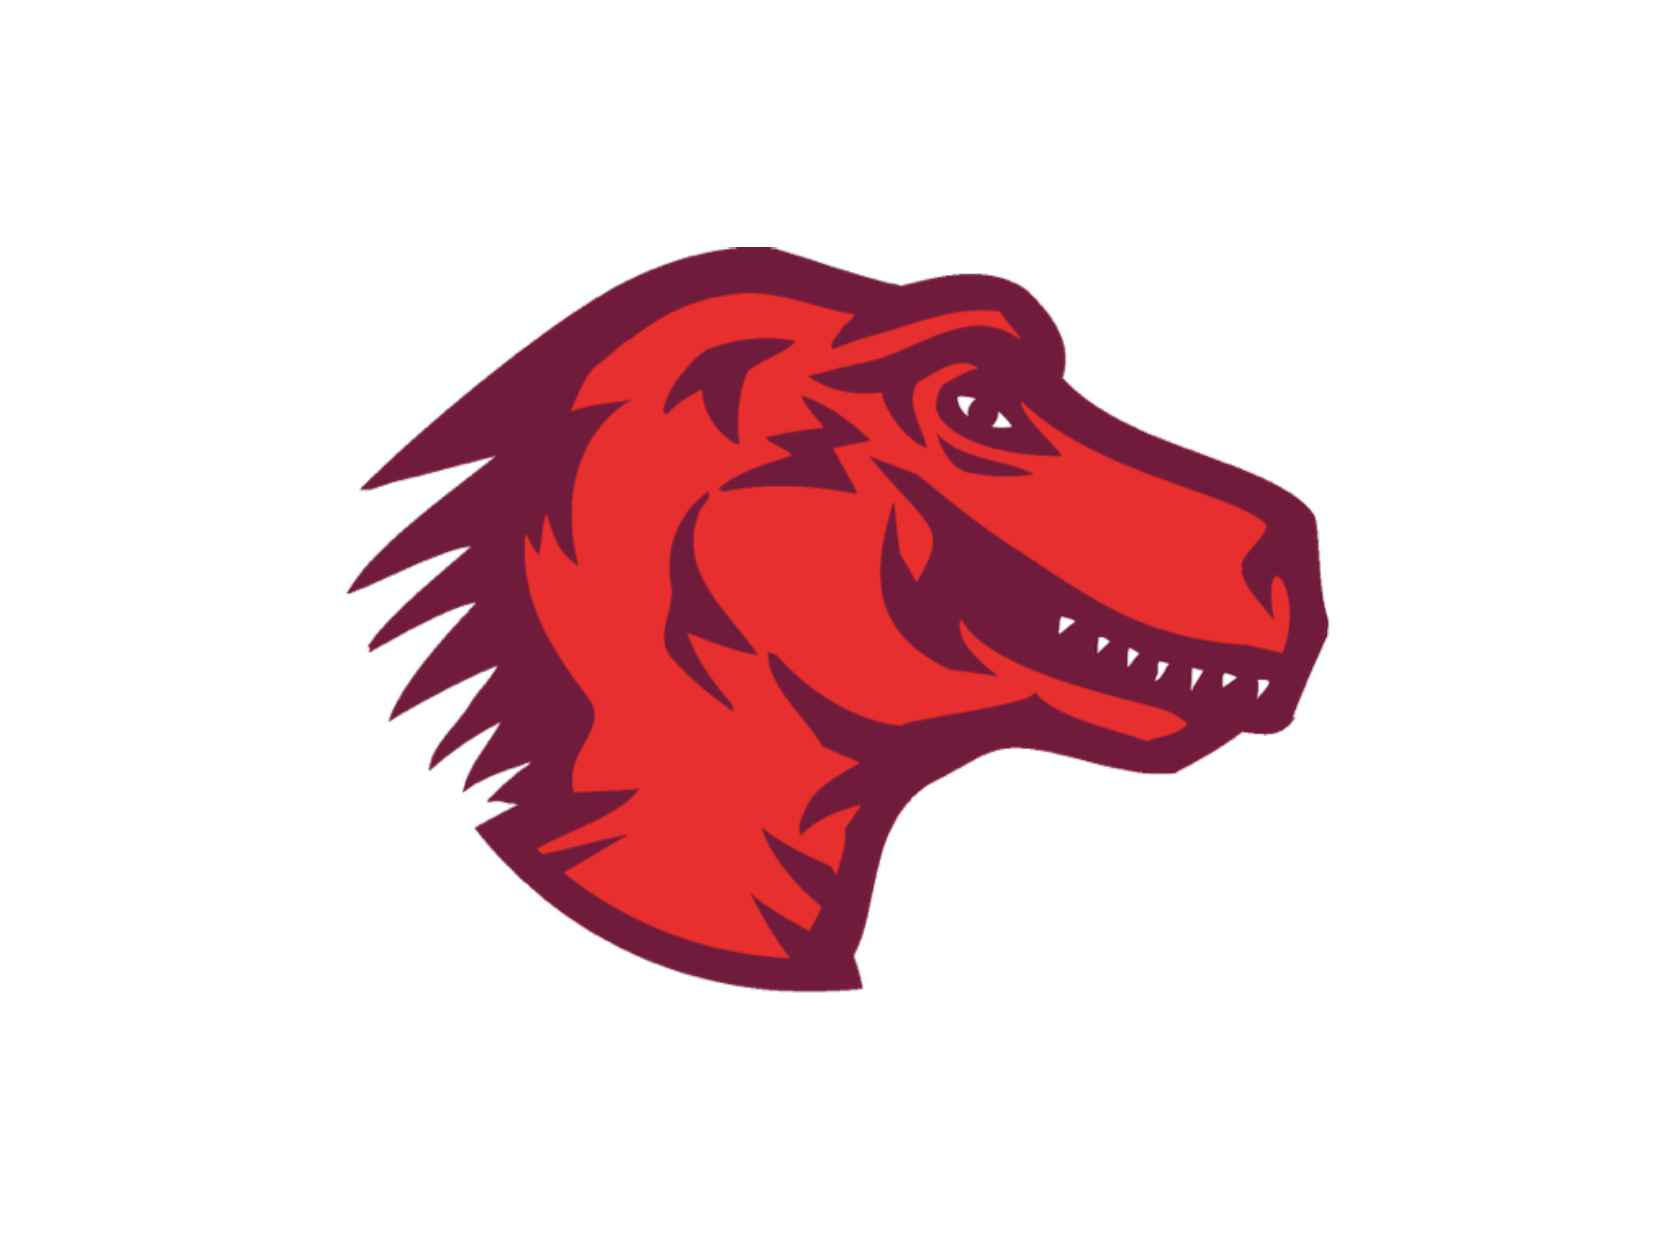 Red Dinosaur Head Logo - GIF: The Image Format that Keeps Giving